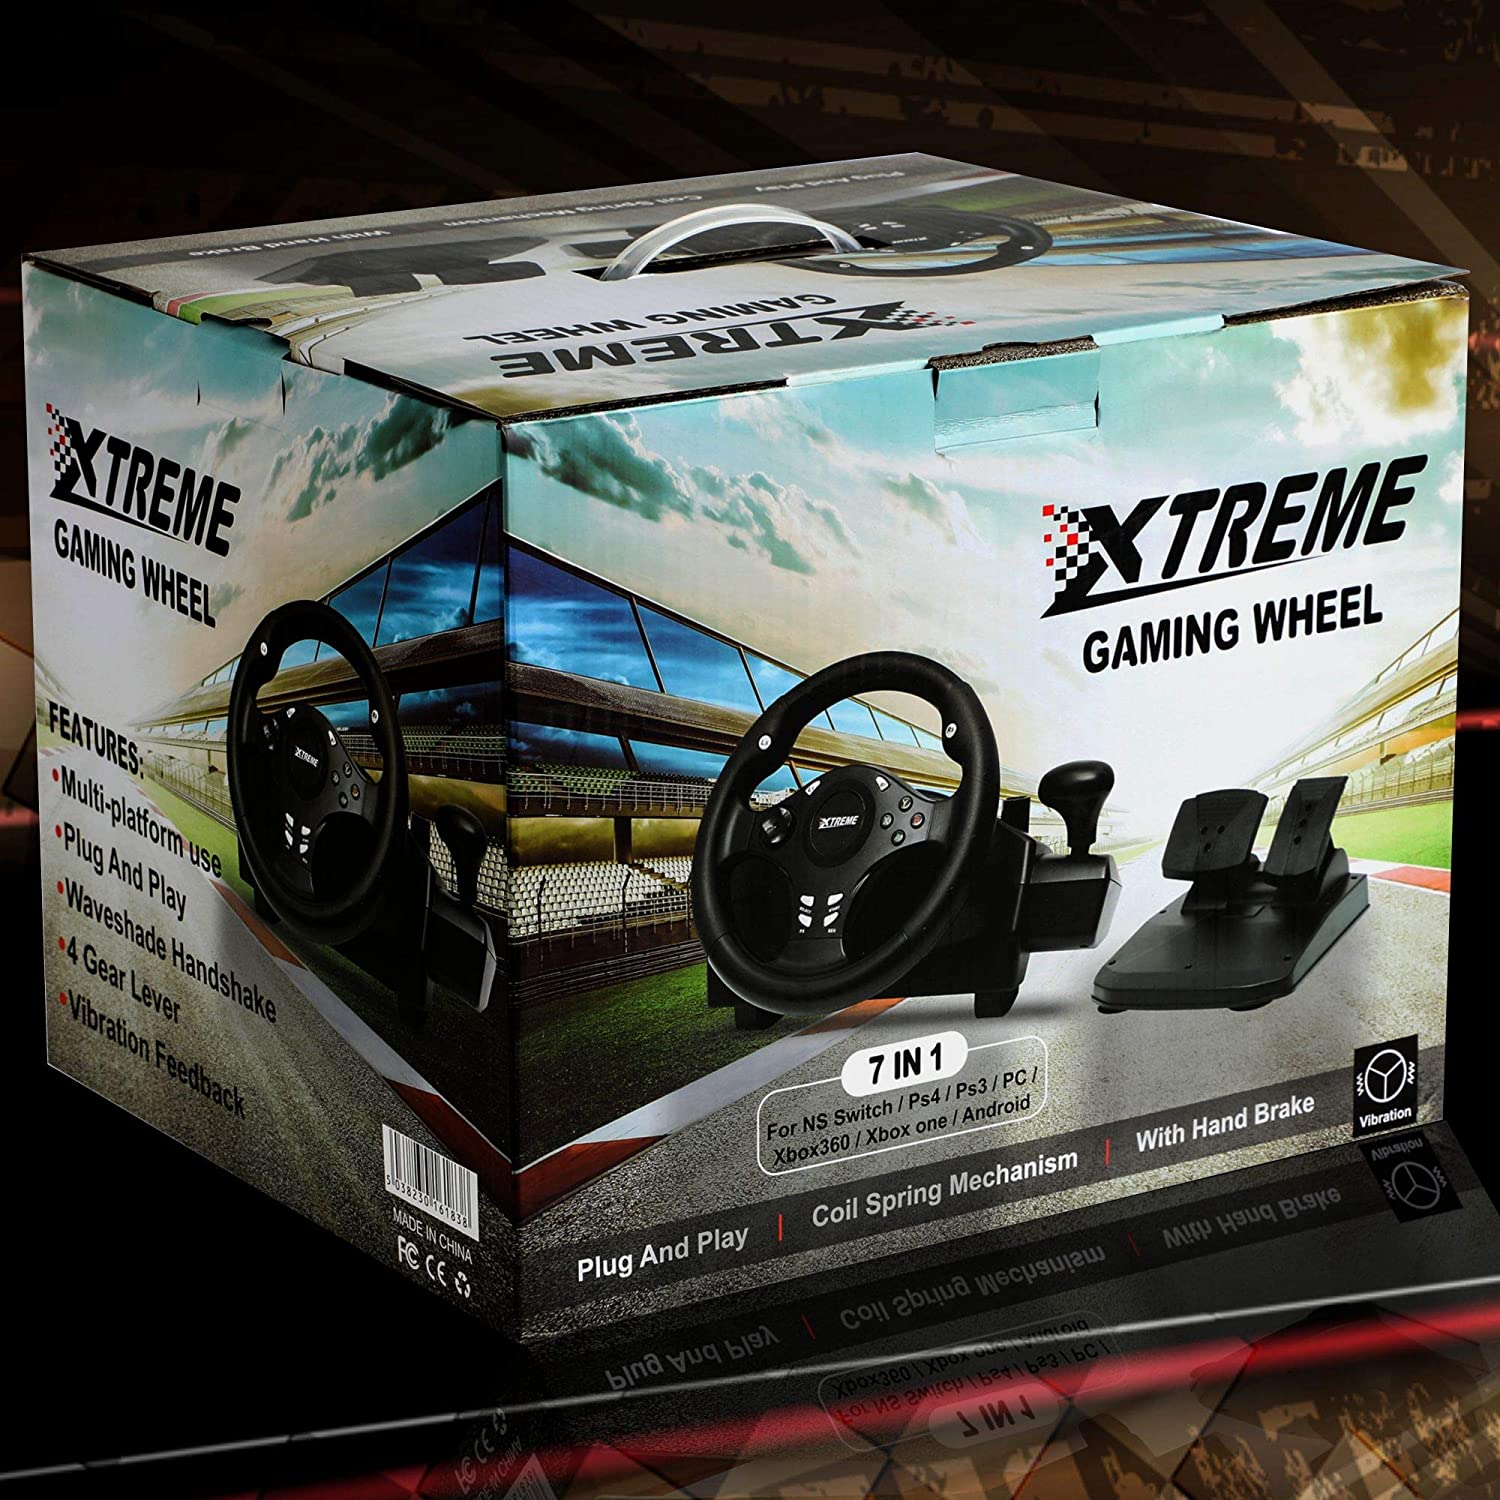 Xtreme Racing Gaming Steering Wheel for PS4, Xbox One, Xbox 360, PC Computer, Nintendo Switch, PS3, Android